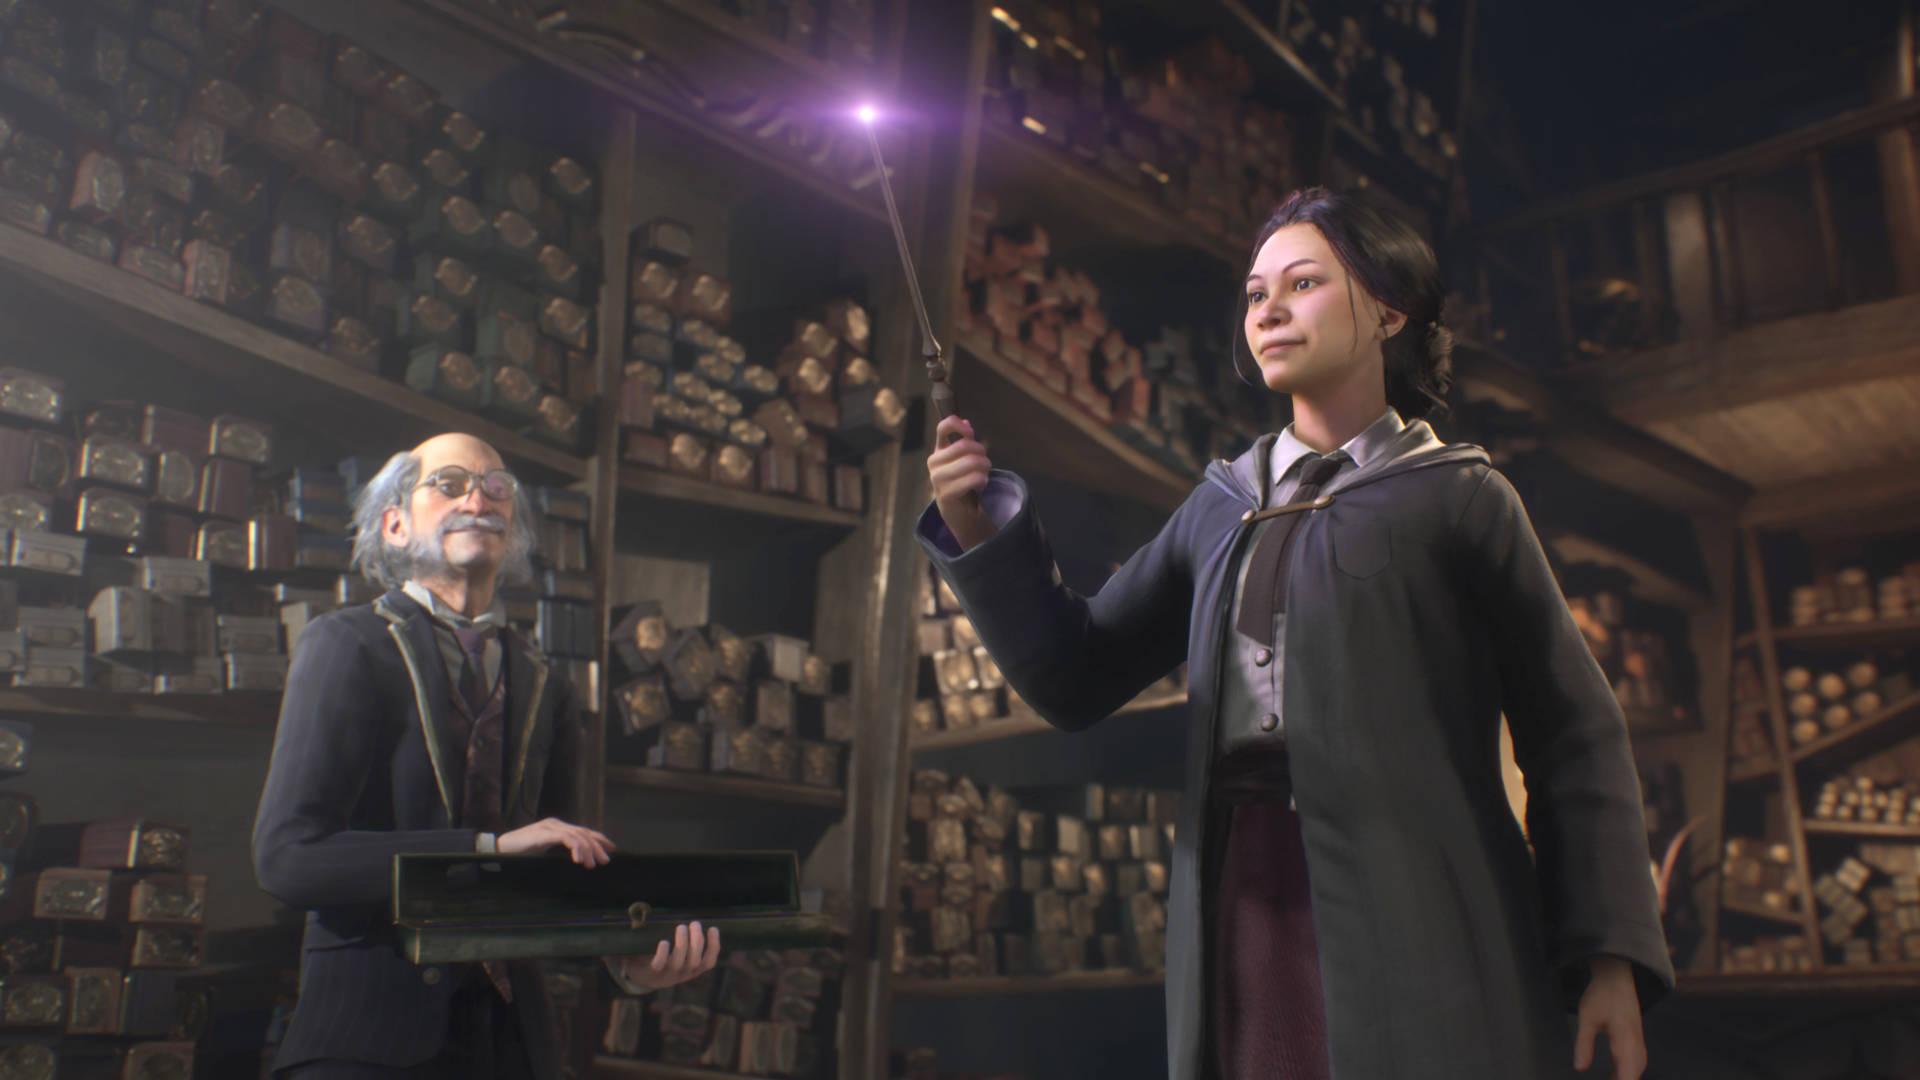 Hogwarts Legacy: A Very Deep Dive Into The New Gameplay